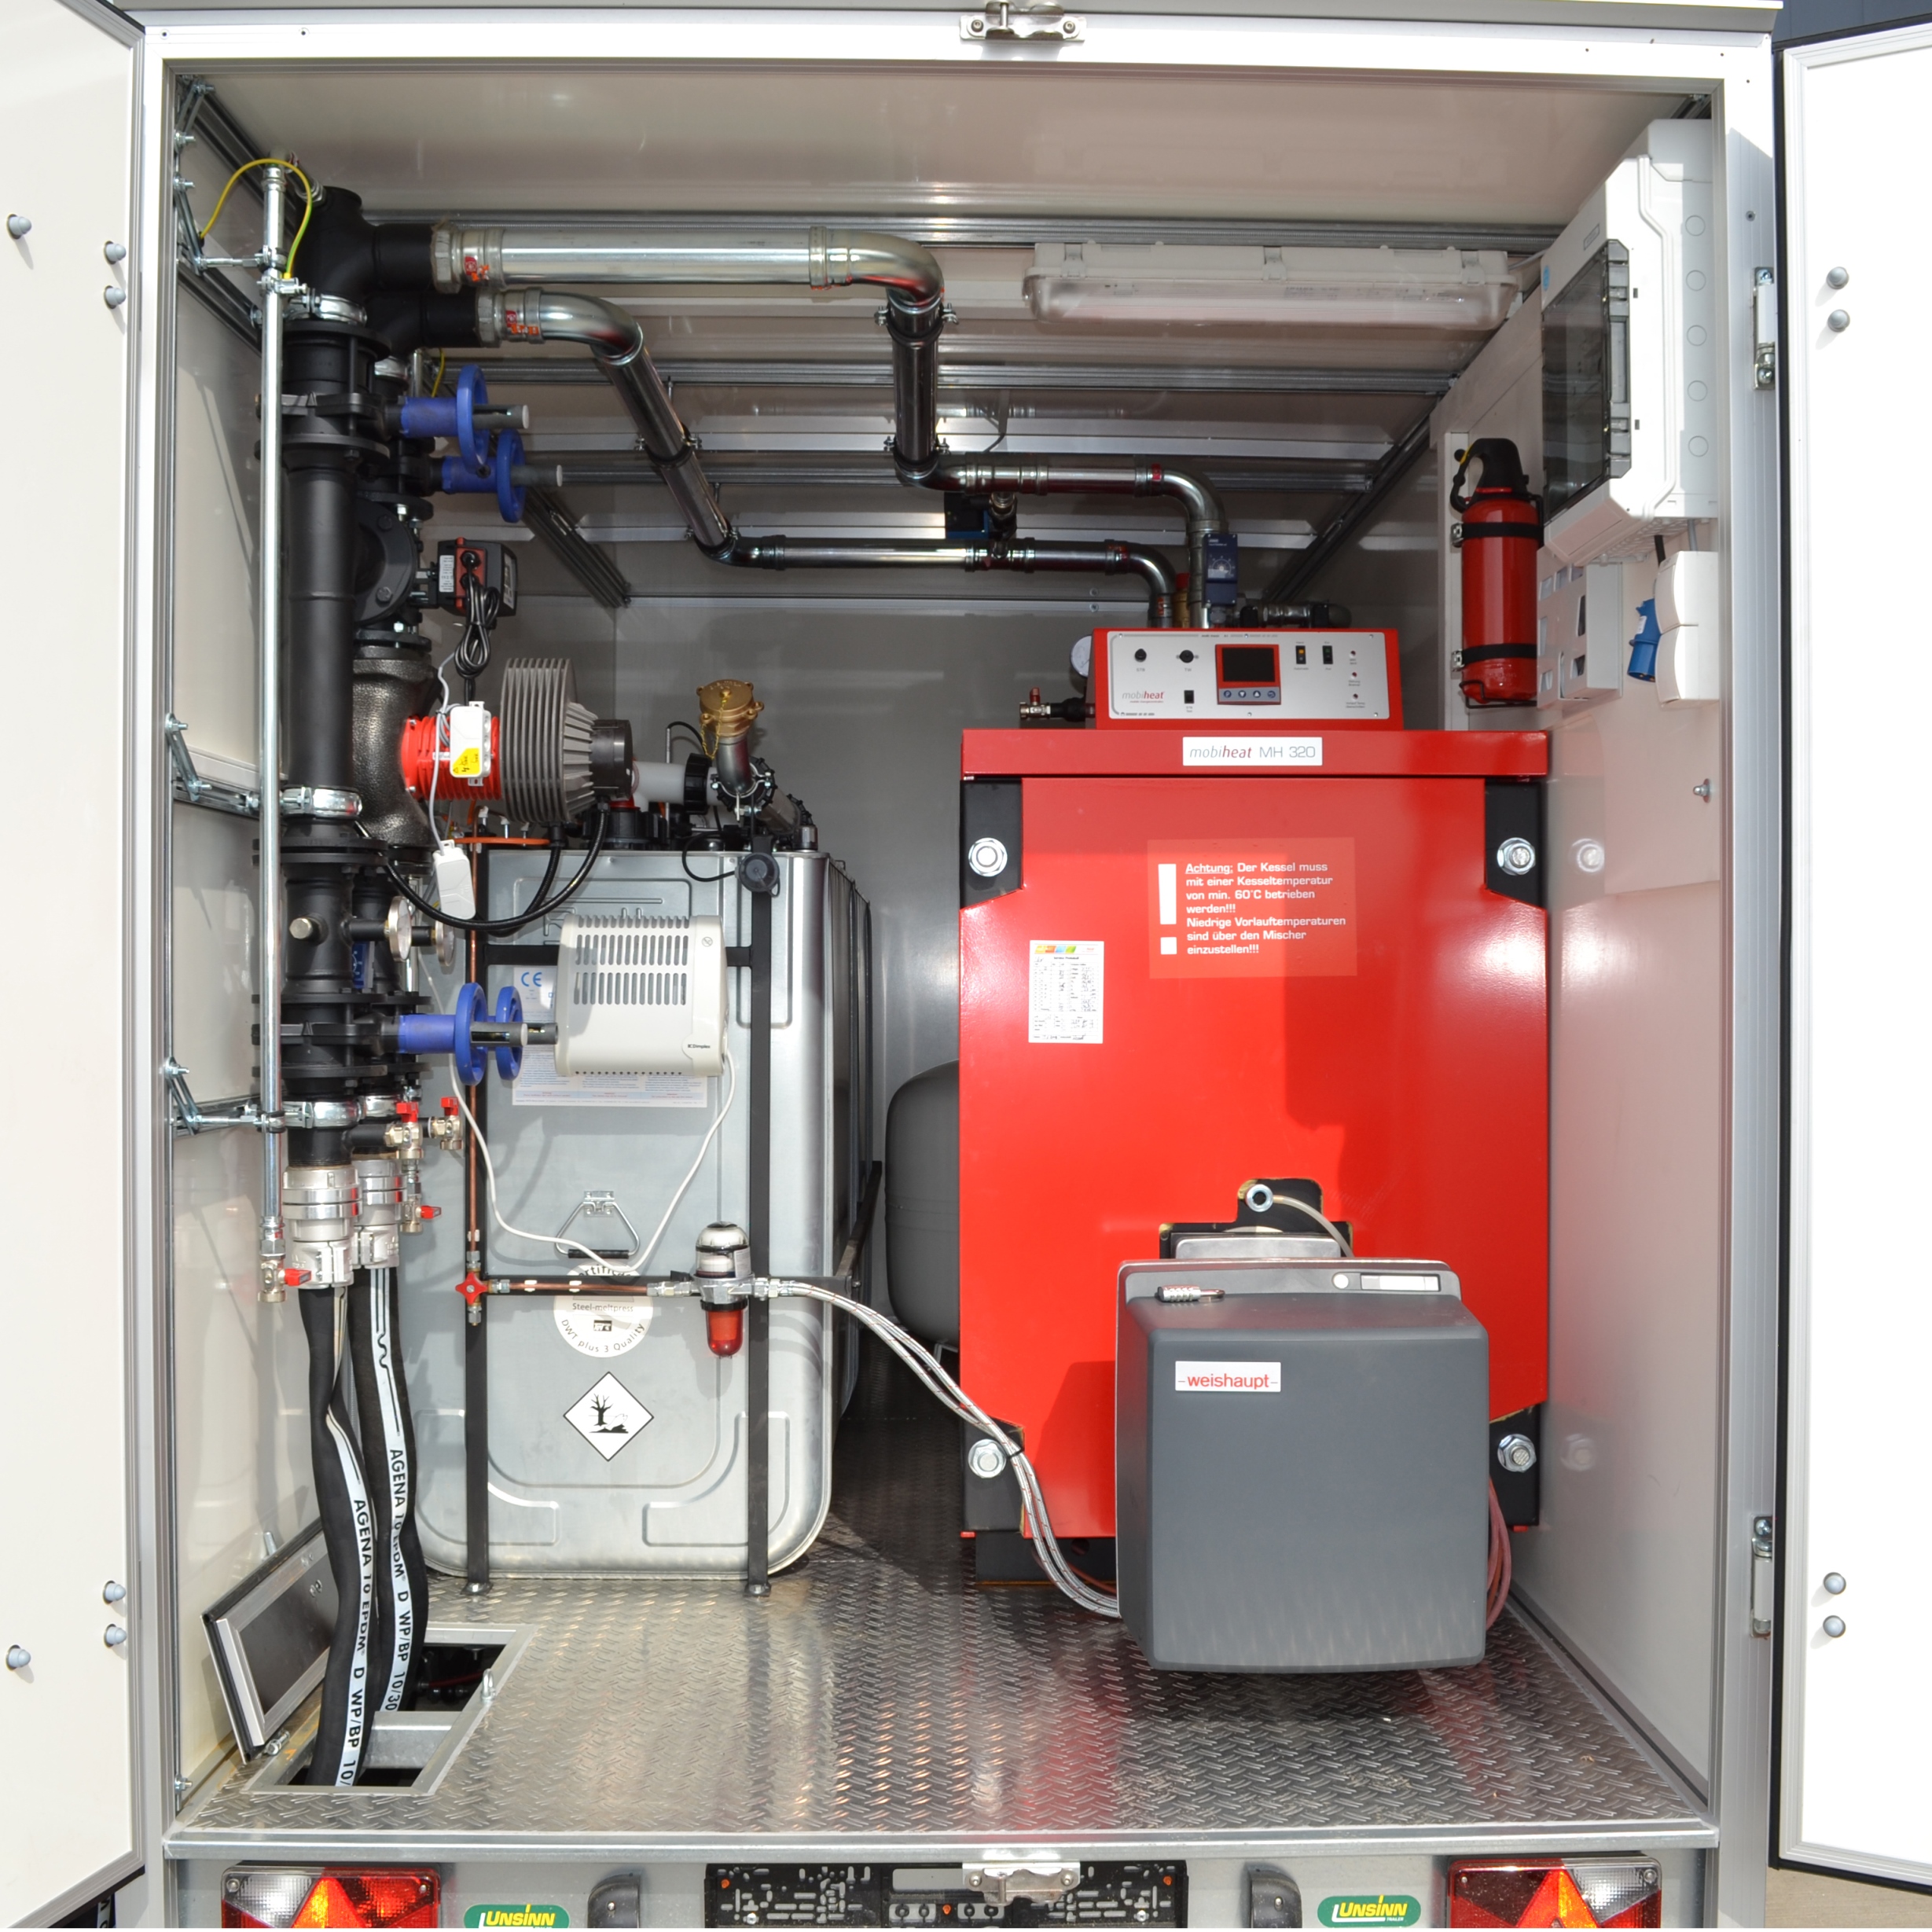 Mobile boilers, temporary alternatives to be connected to existing networks